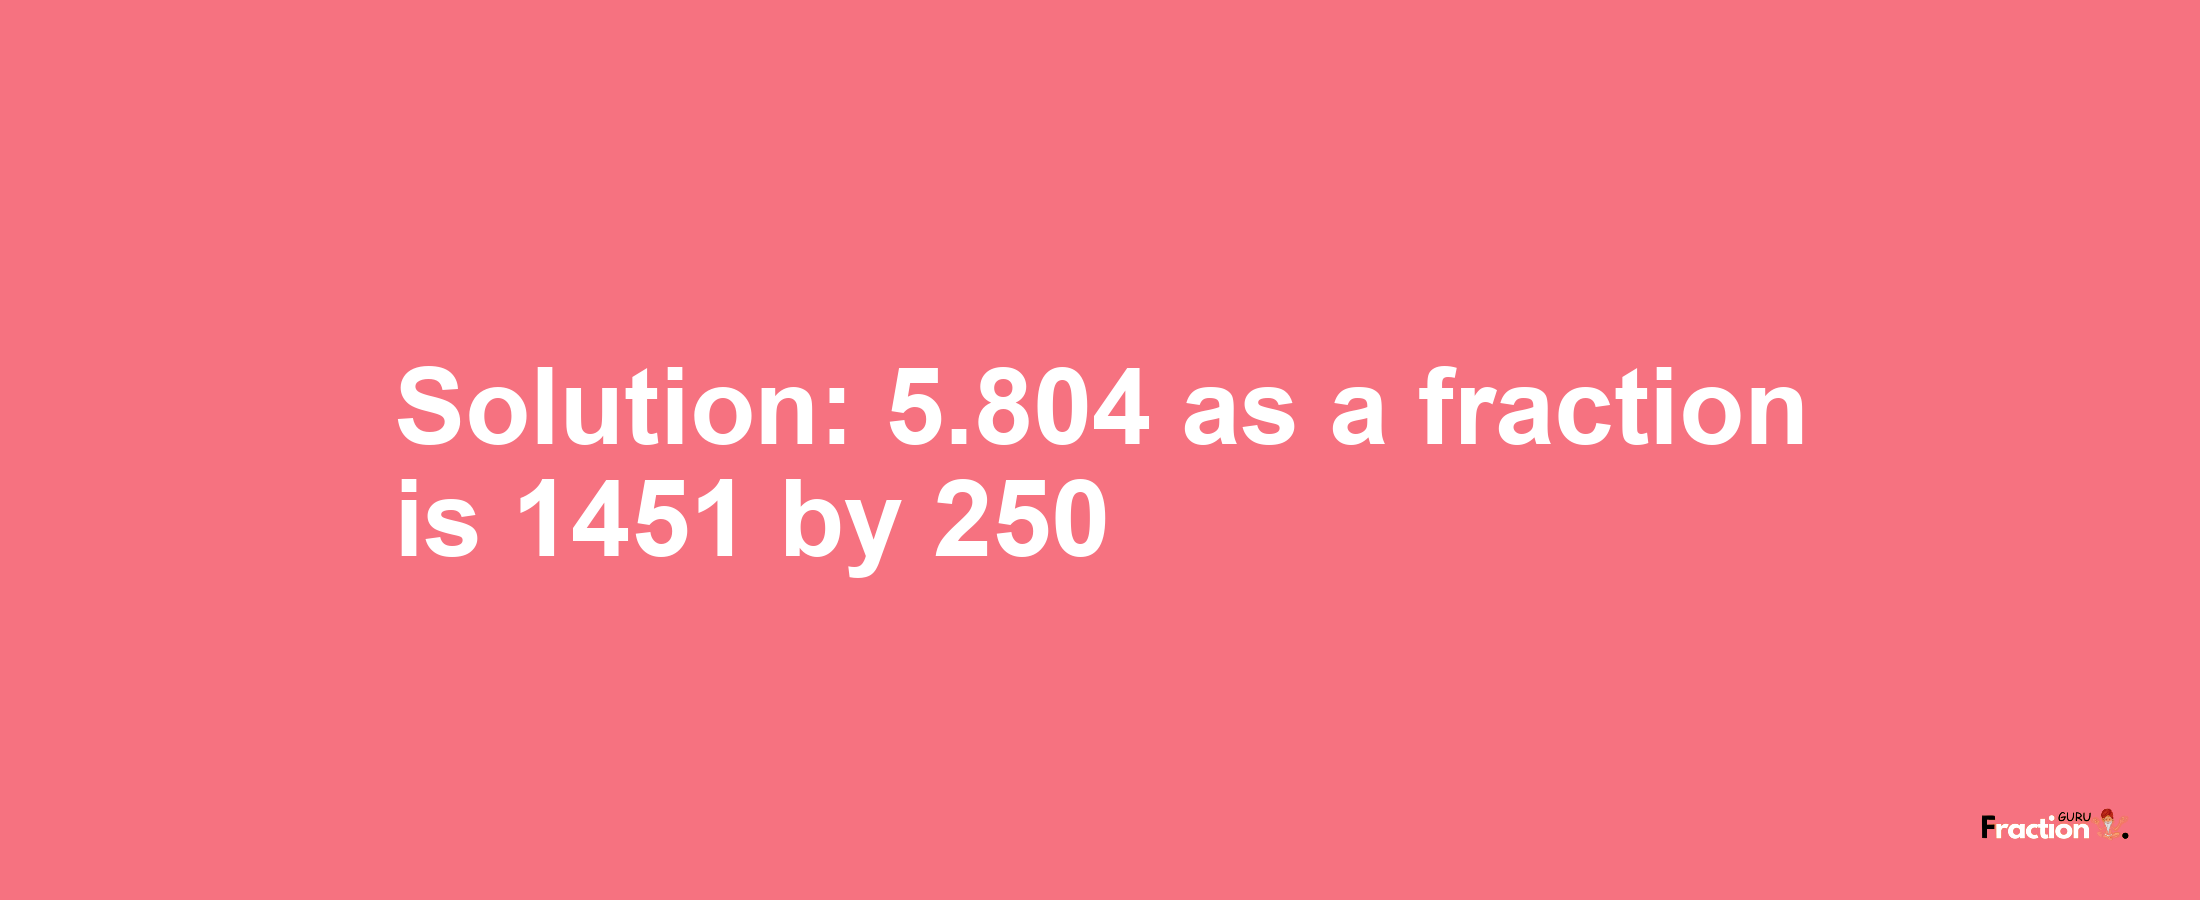 Solution:5.804 as a fraction is 1451/250